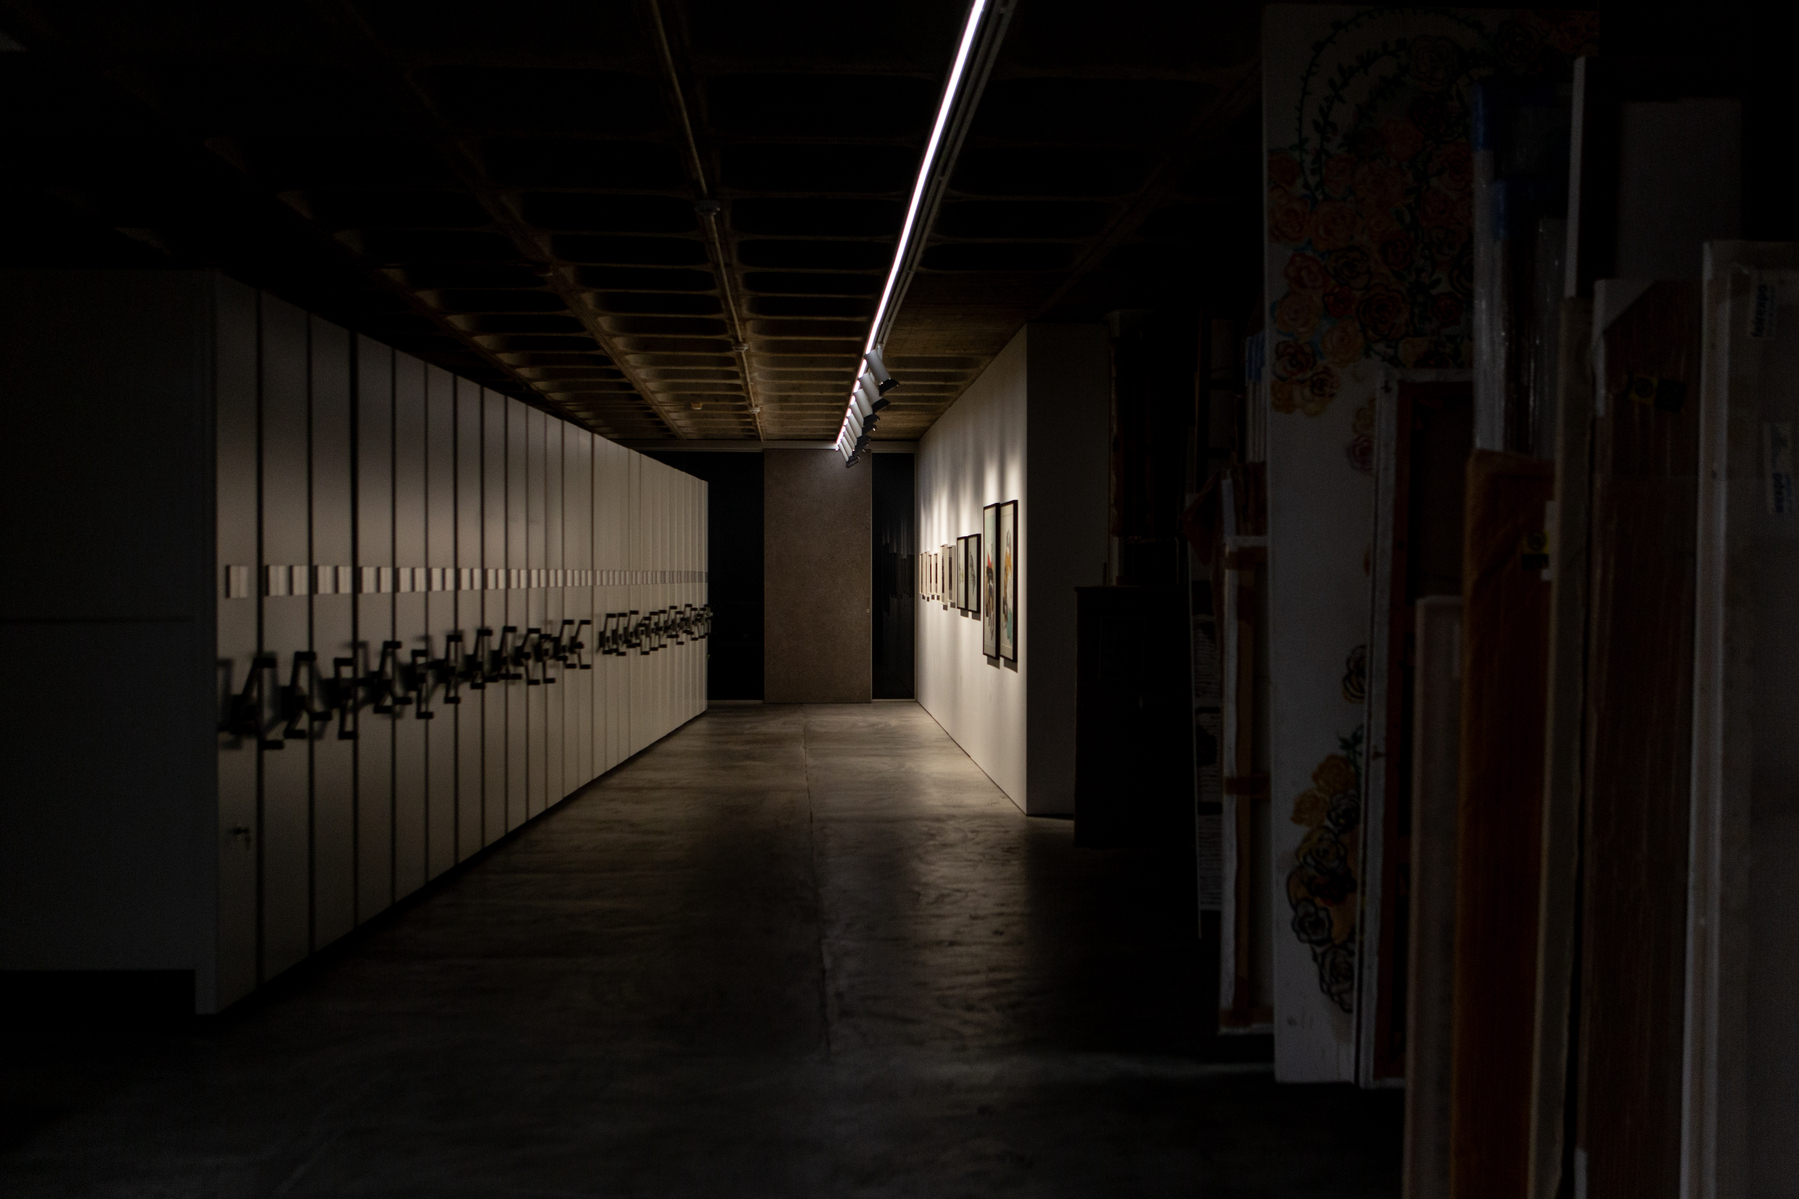 A dimly lit corridor flanked by lockers on the left and framed artworks on the right, with overhead fluorescent lighting and stacked canvases to the far right.